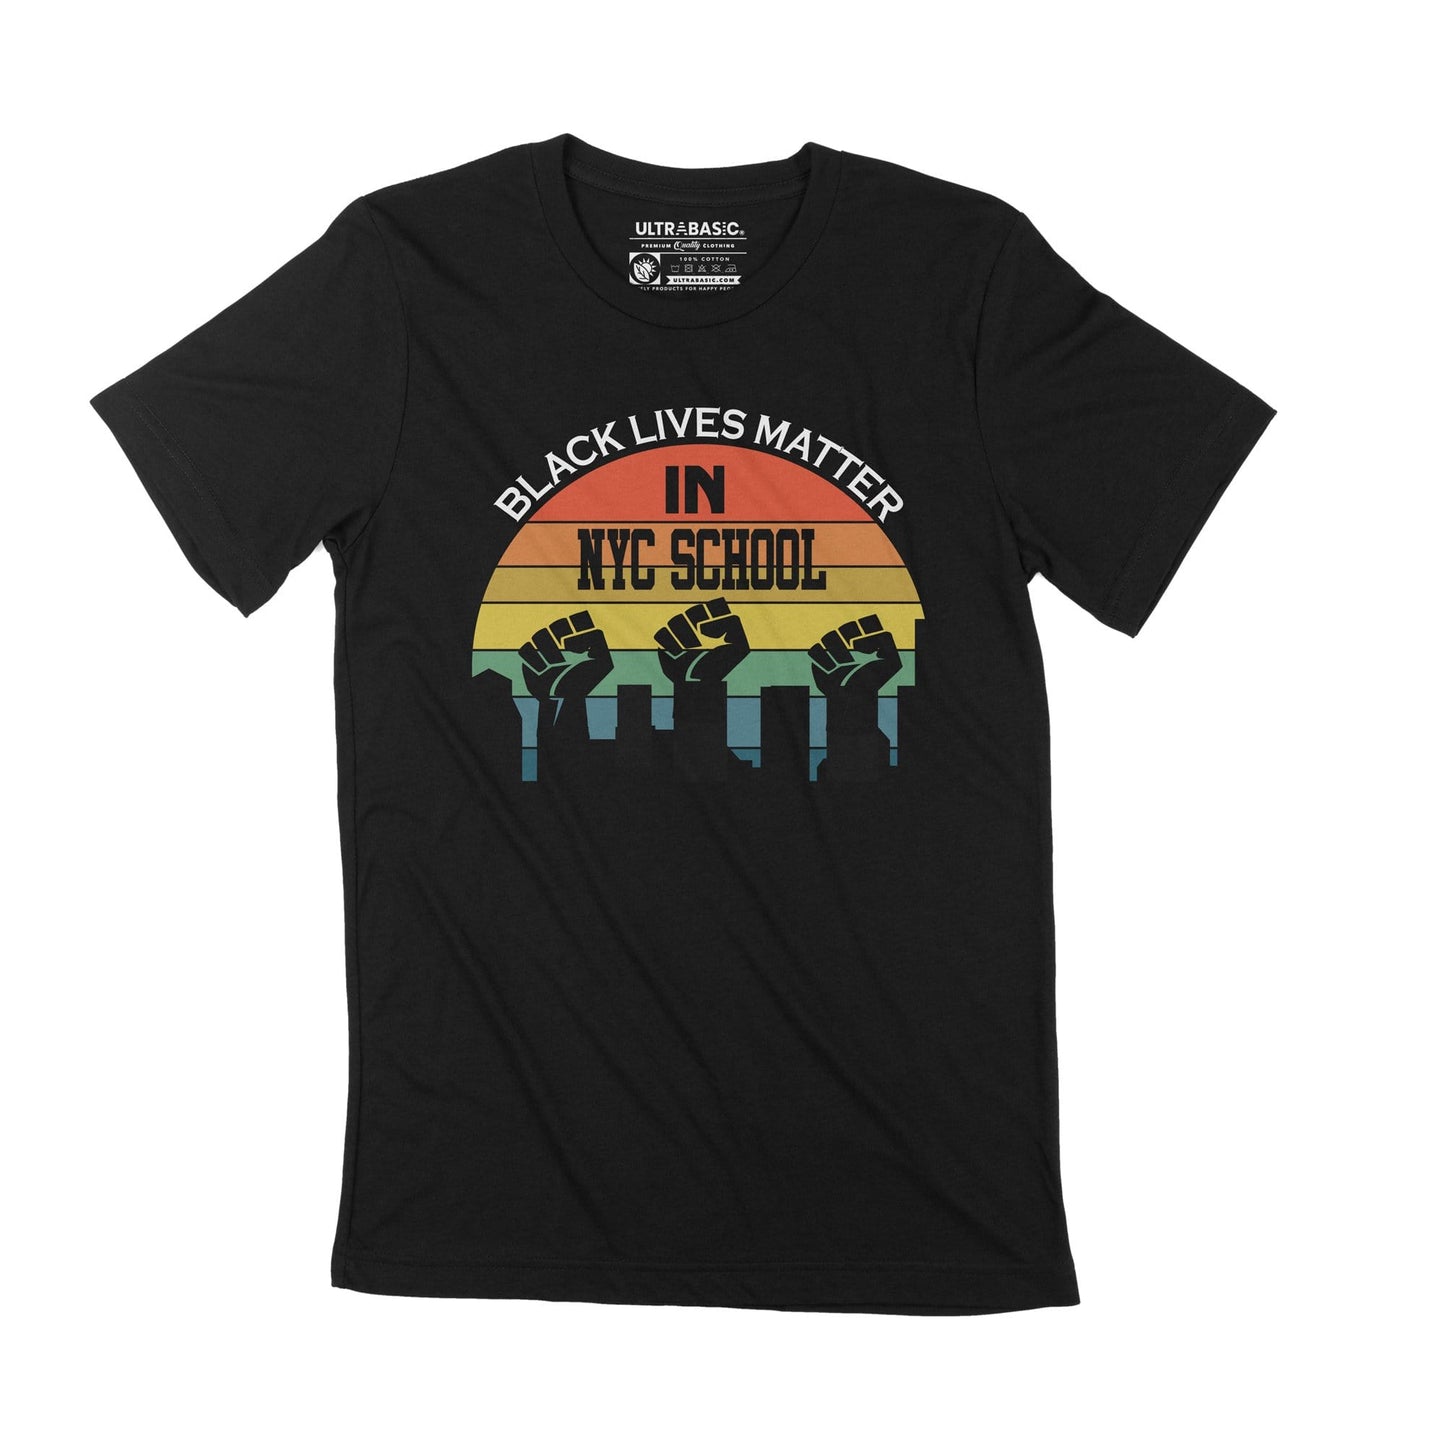 george floyd i cant breathe tshirt revolution movement protest shirt love is love no hate tees support kindness respect us equal rights freedom empowerment no racism anti racist solidarity civil right say their names silence is violence dont shoot